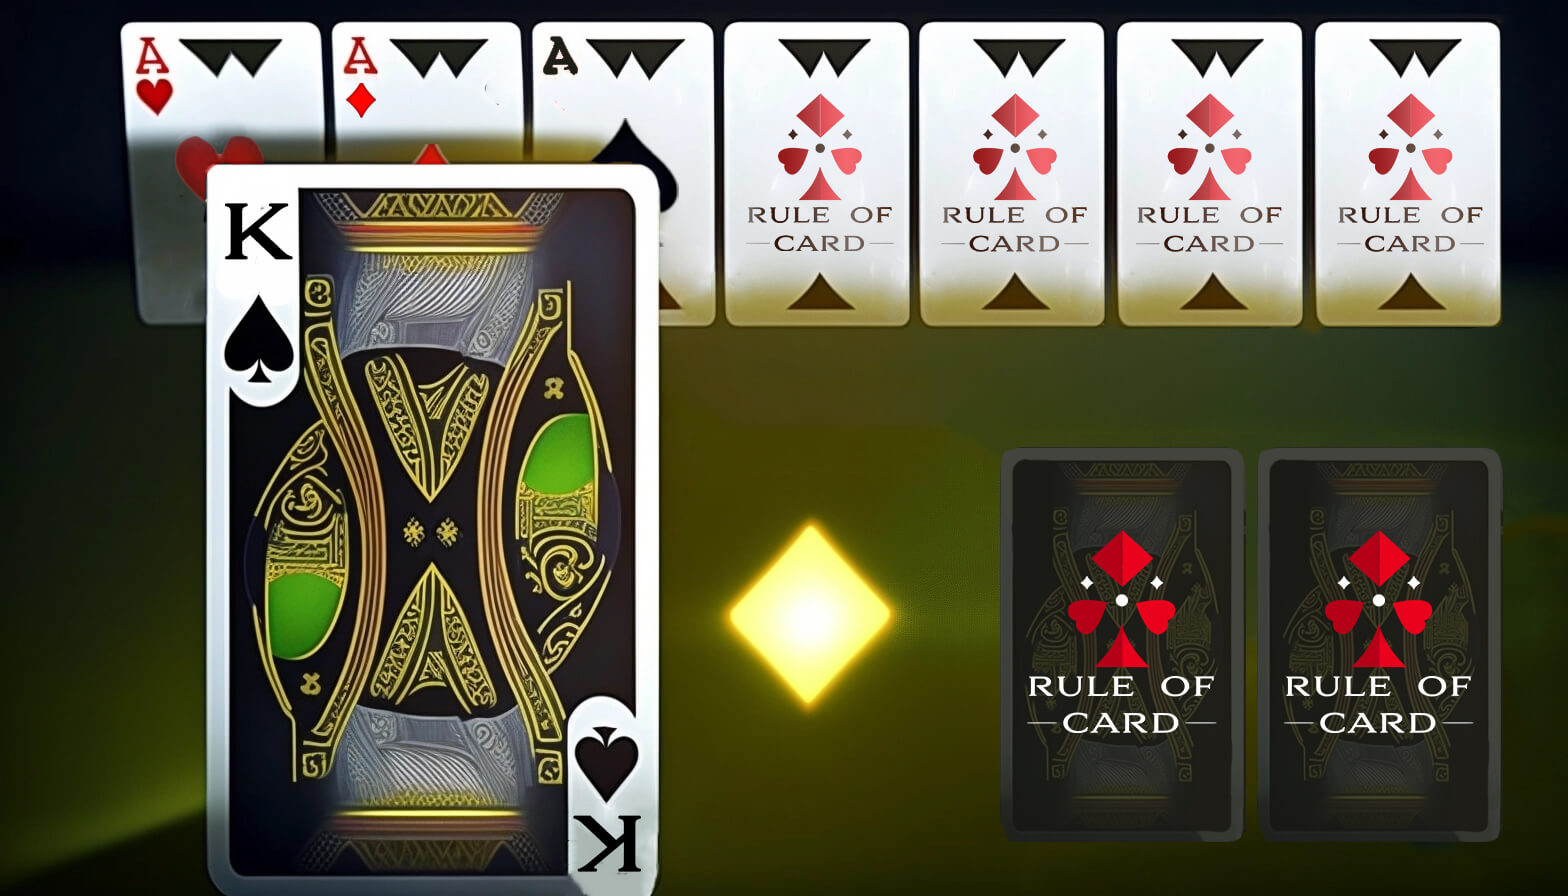 Playing the card game Solitaire